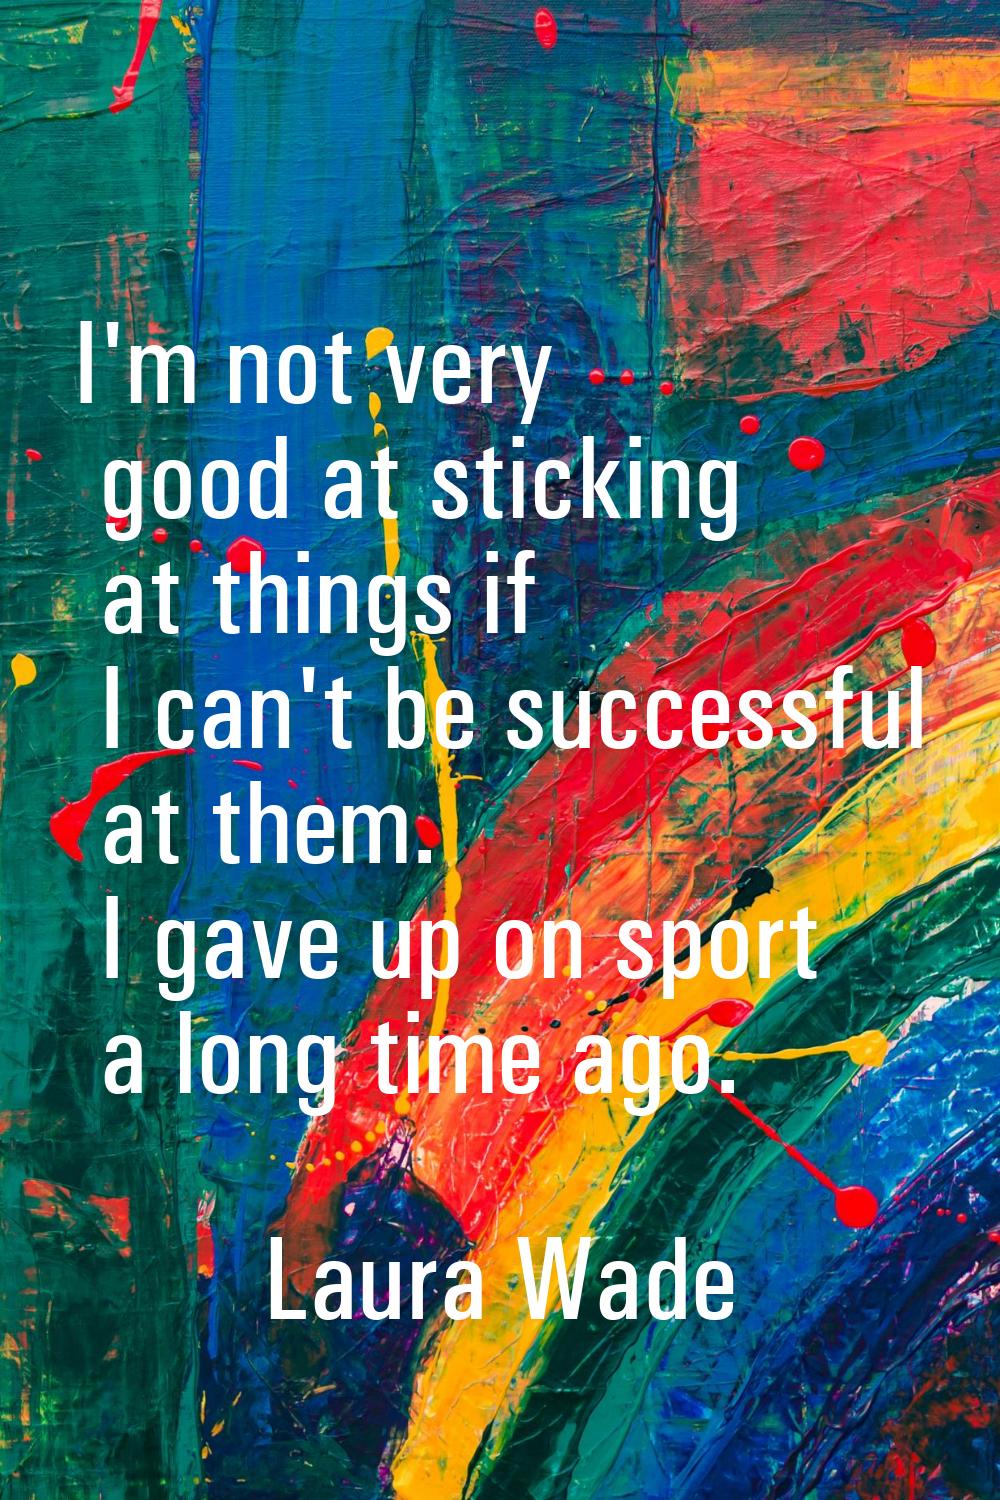 I'm not very good at sticking at things if I can't be successful at them. I gave up on sport a long